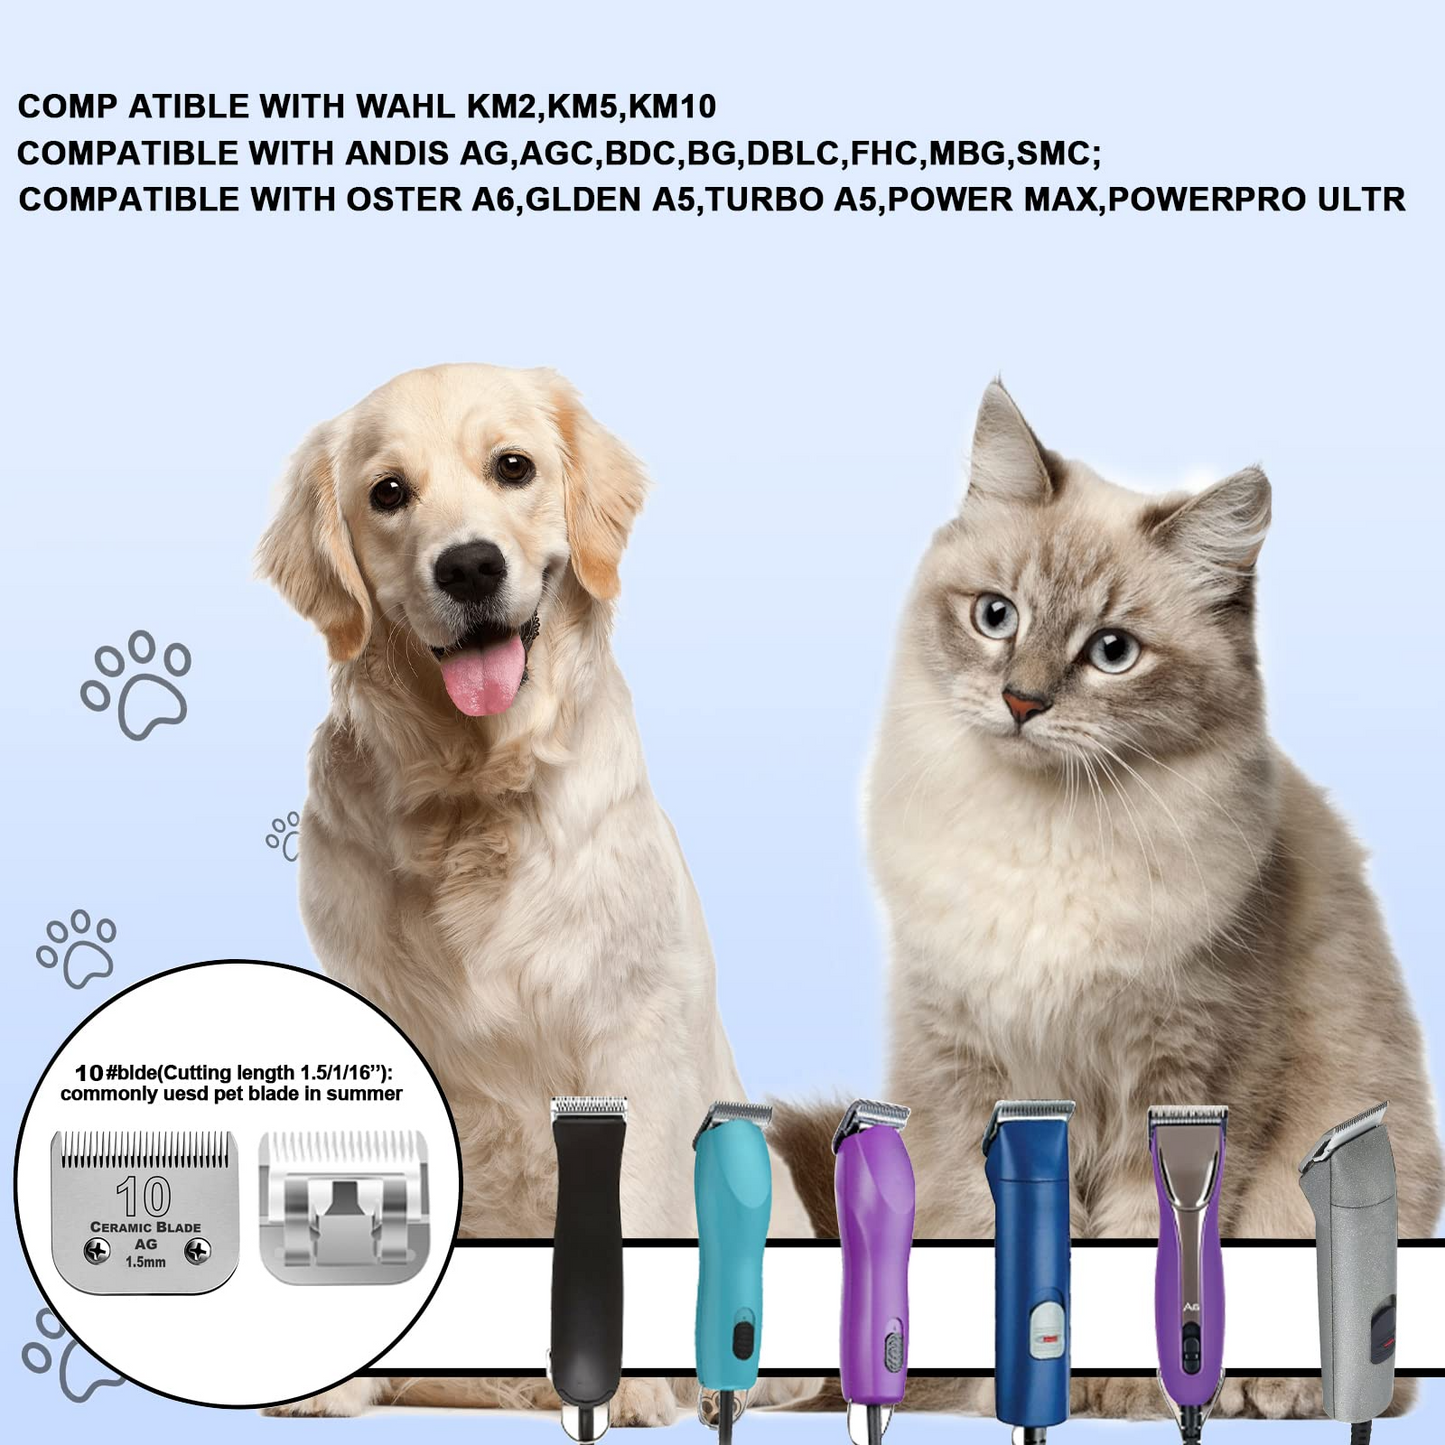 Dog Grooming Clipper Replacement Blades Compatible with Andis/Wahl / Oster Dog Clippers #10+#30+5FC